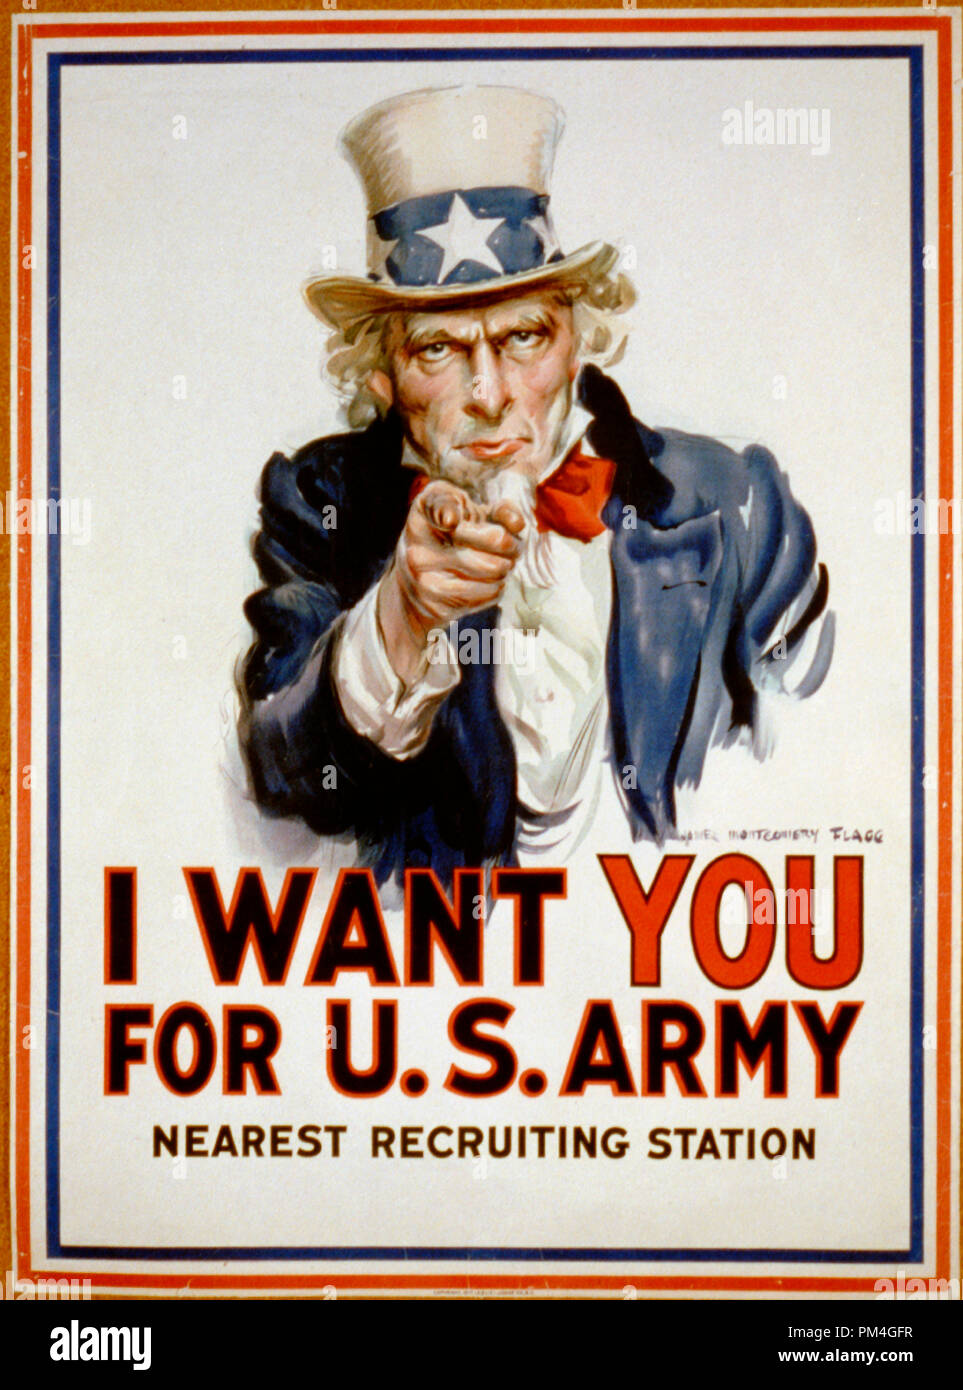 Uncle Sam 'I Want You' US Army Recruiting Poster. Created in 1916. Original Illustration by James Montgomery Flagg  File Reference # 1003 001THA Stock Photo